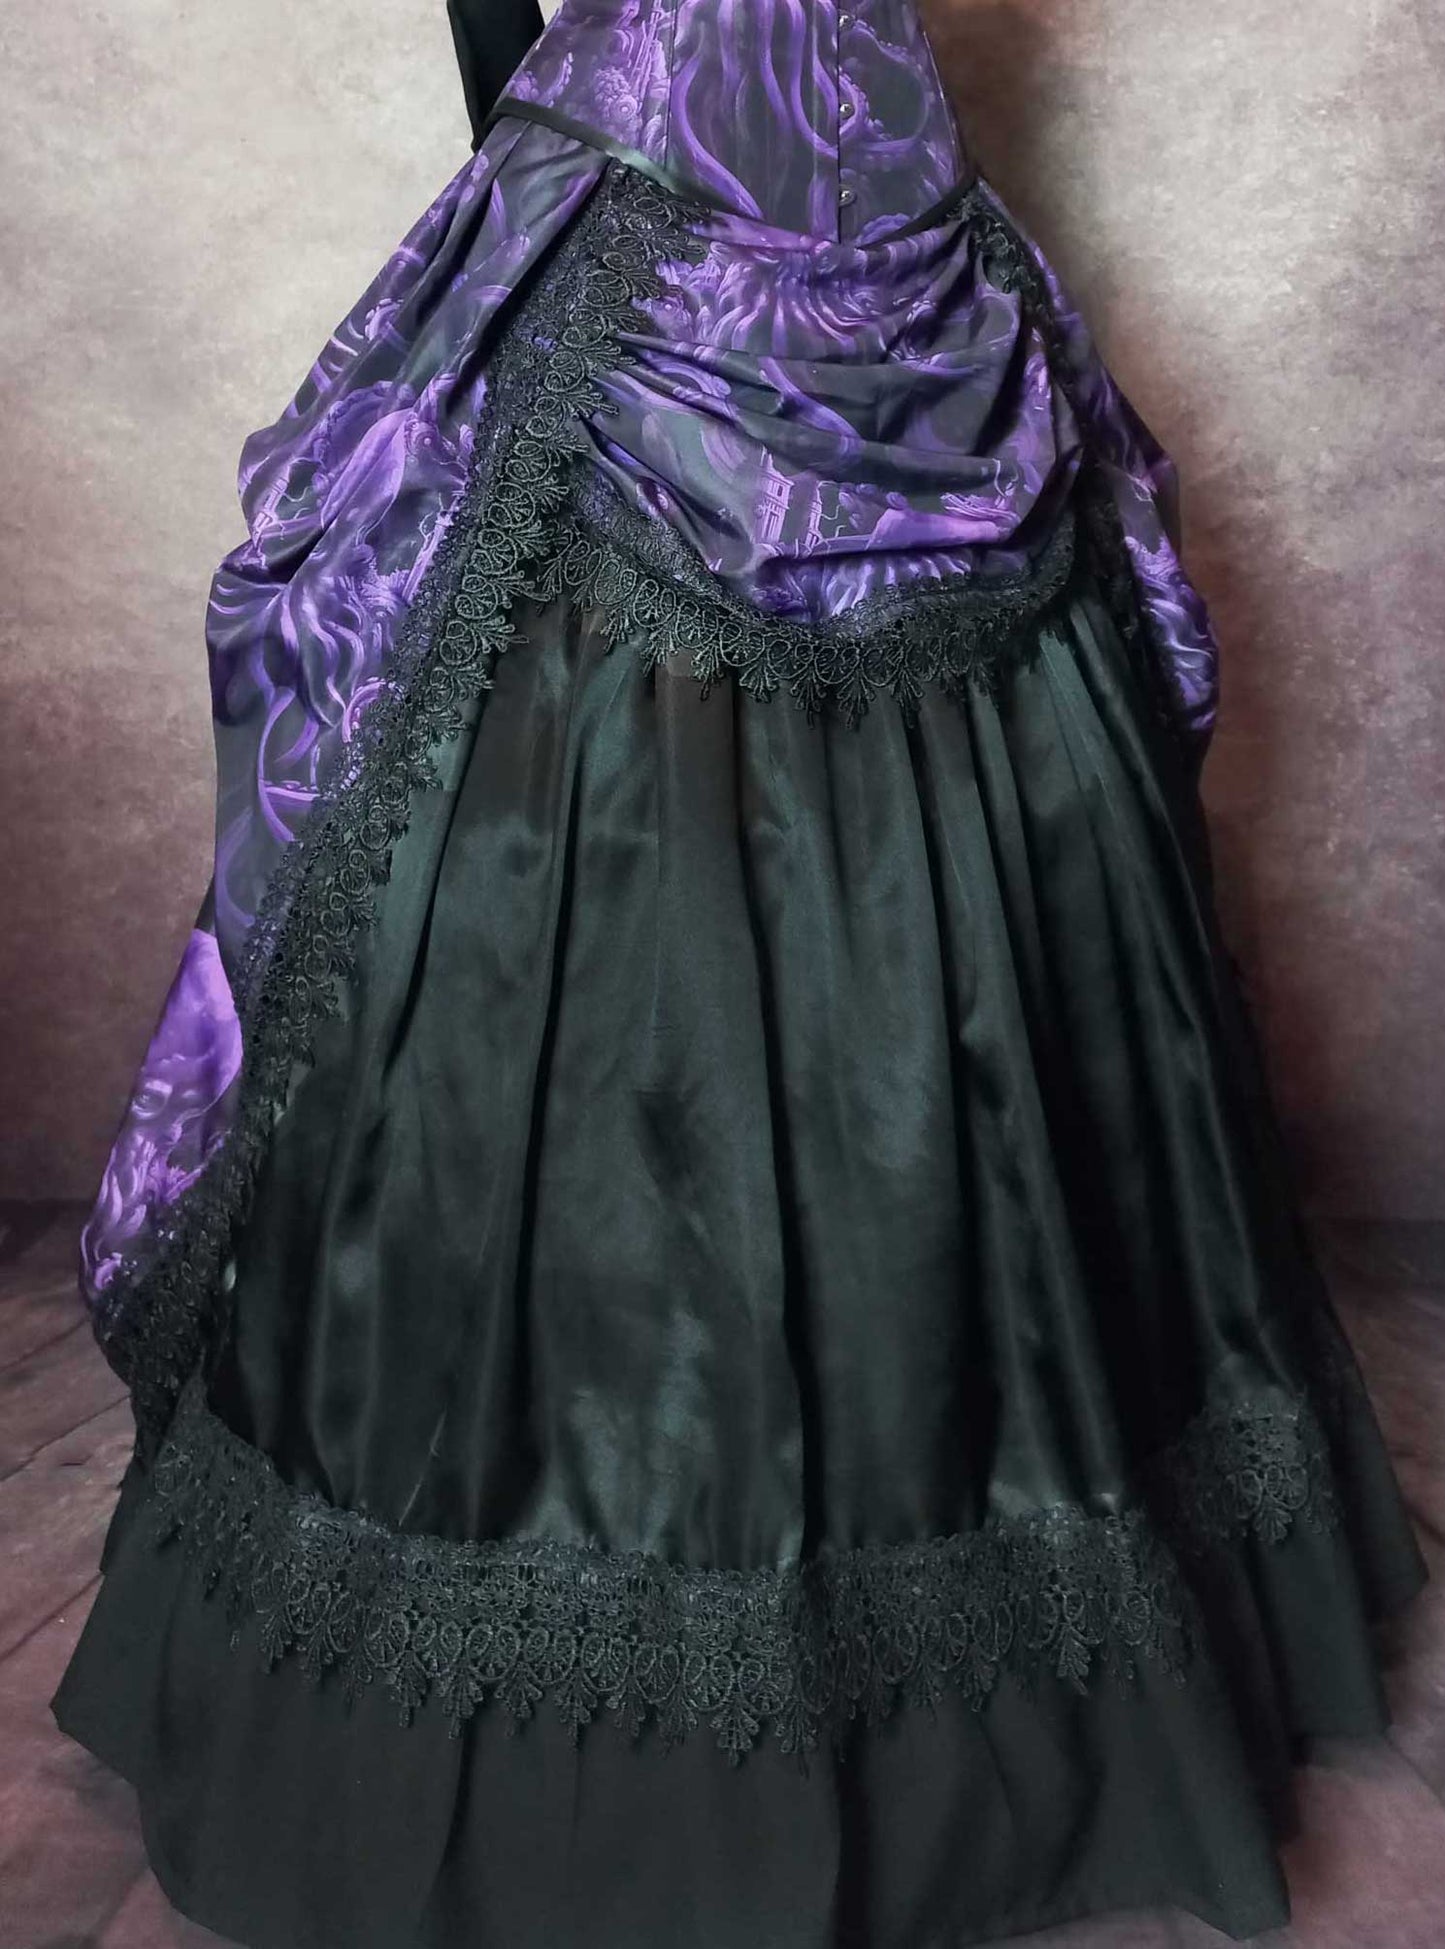 Cthulhu Lord of the Deep Corset Ensemble - Purple Gothic Victorian Costume